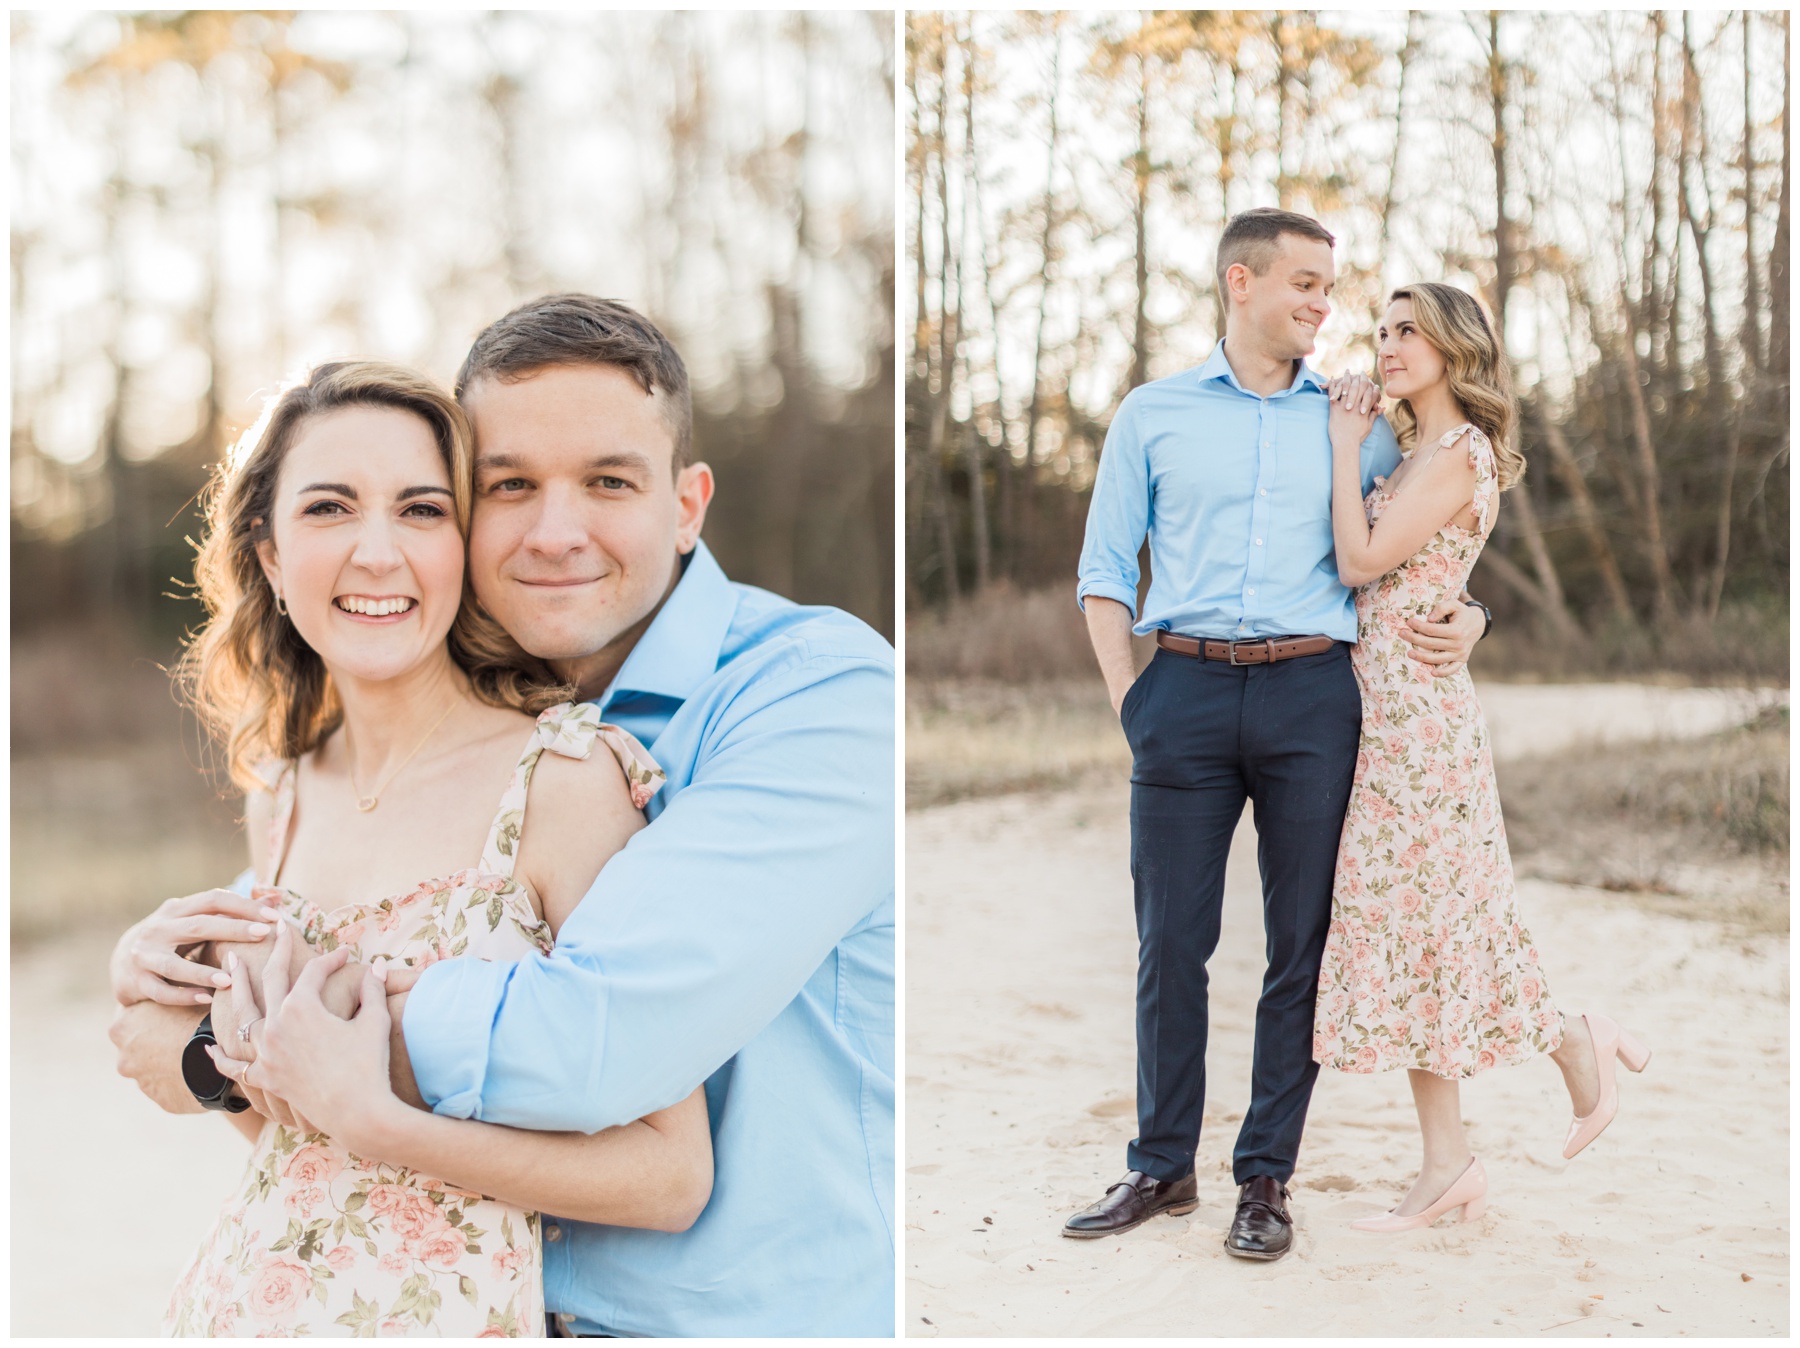 Golden hour engagement photos in a creek bed 